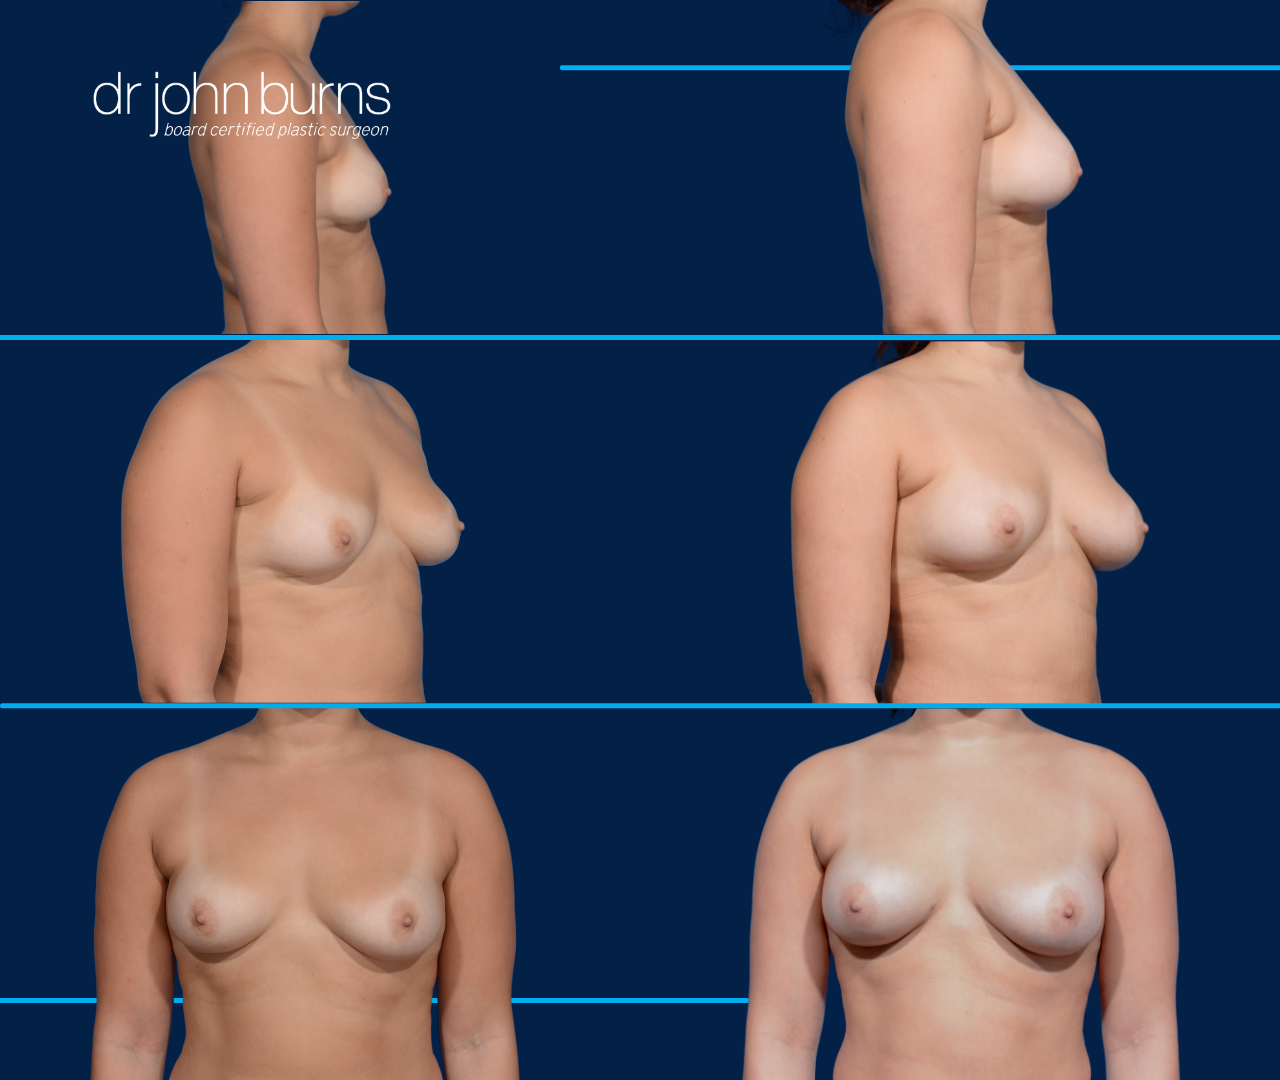 case 7- before and after breast augmentation fat transfer by top plastic surgeon, Dr. John Burns